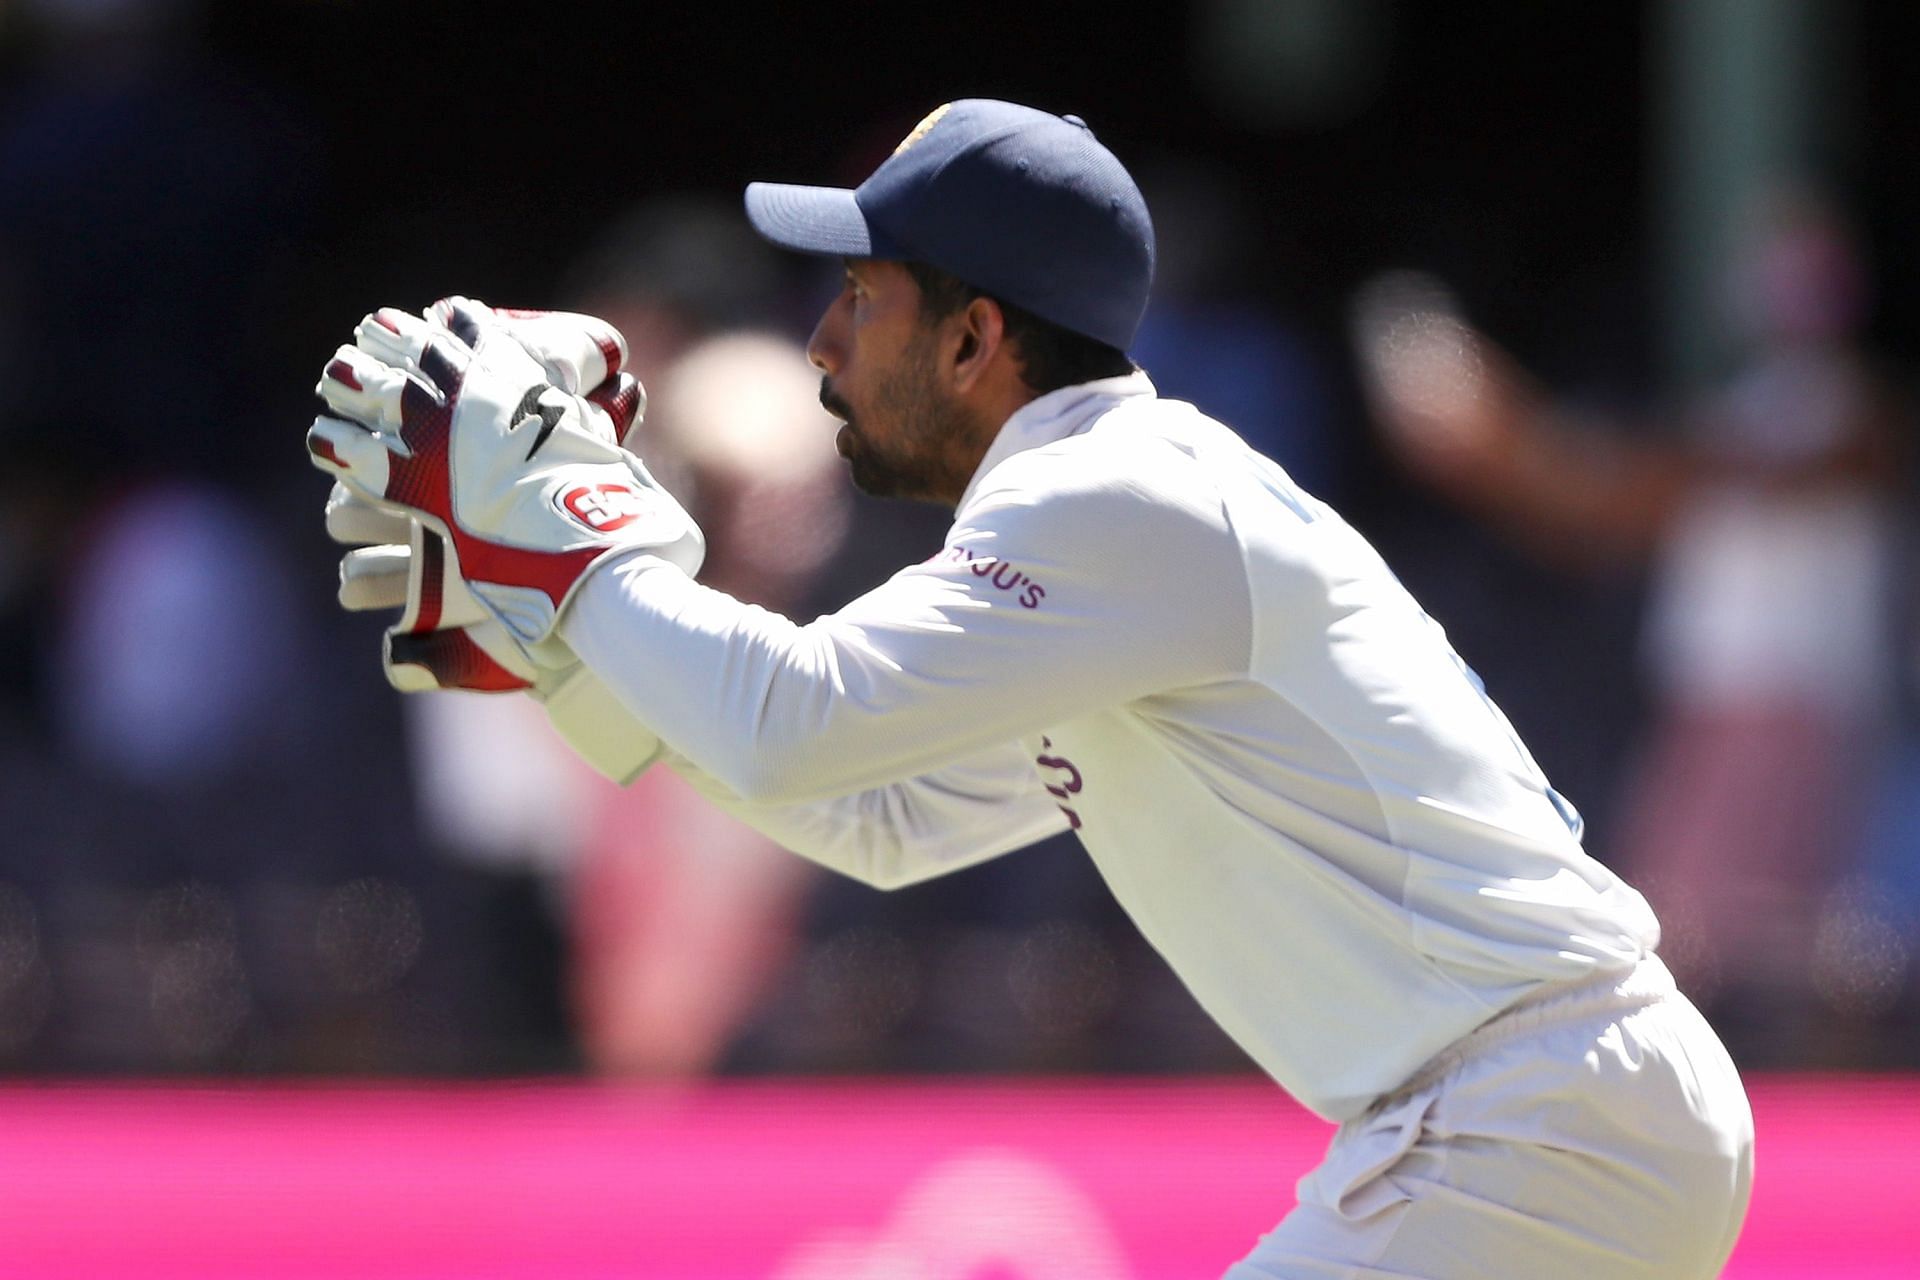 The Indian selectors have decided to look beyond Wriddhiman Saha